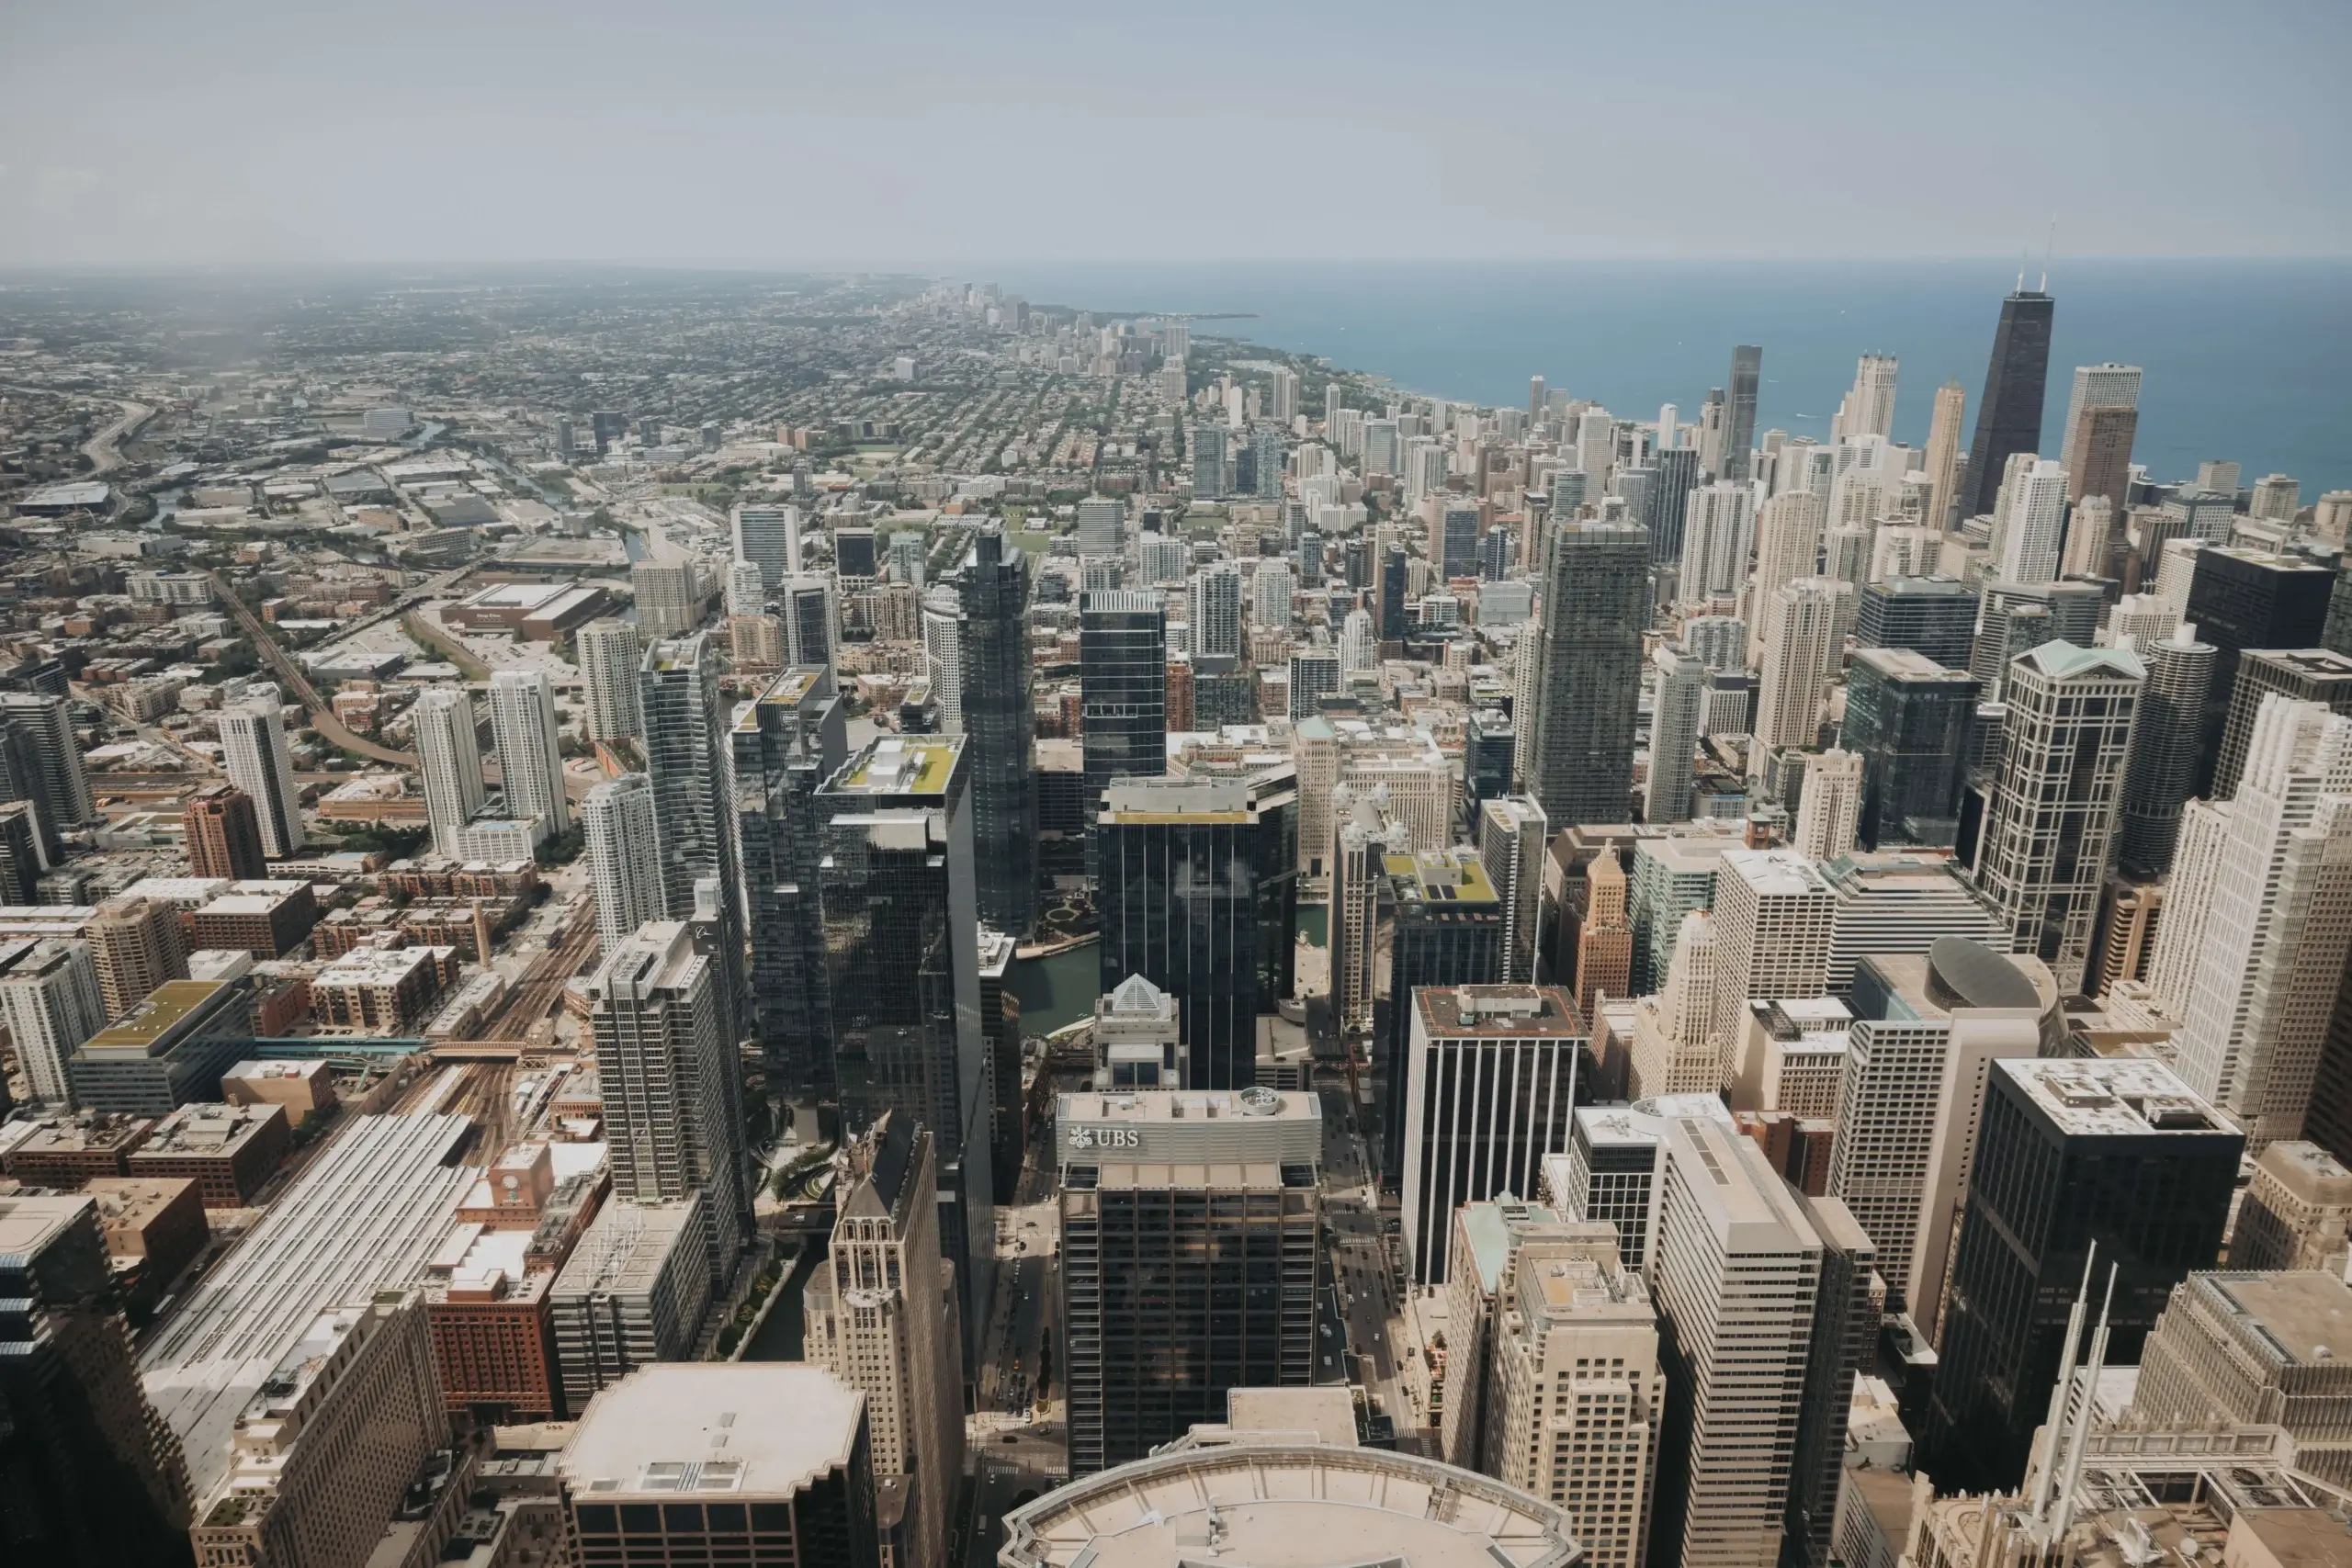 view of the city of Chicago from the 67th floor of the Willis Tower